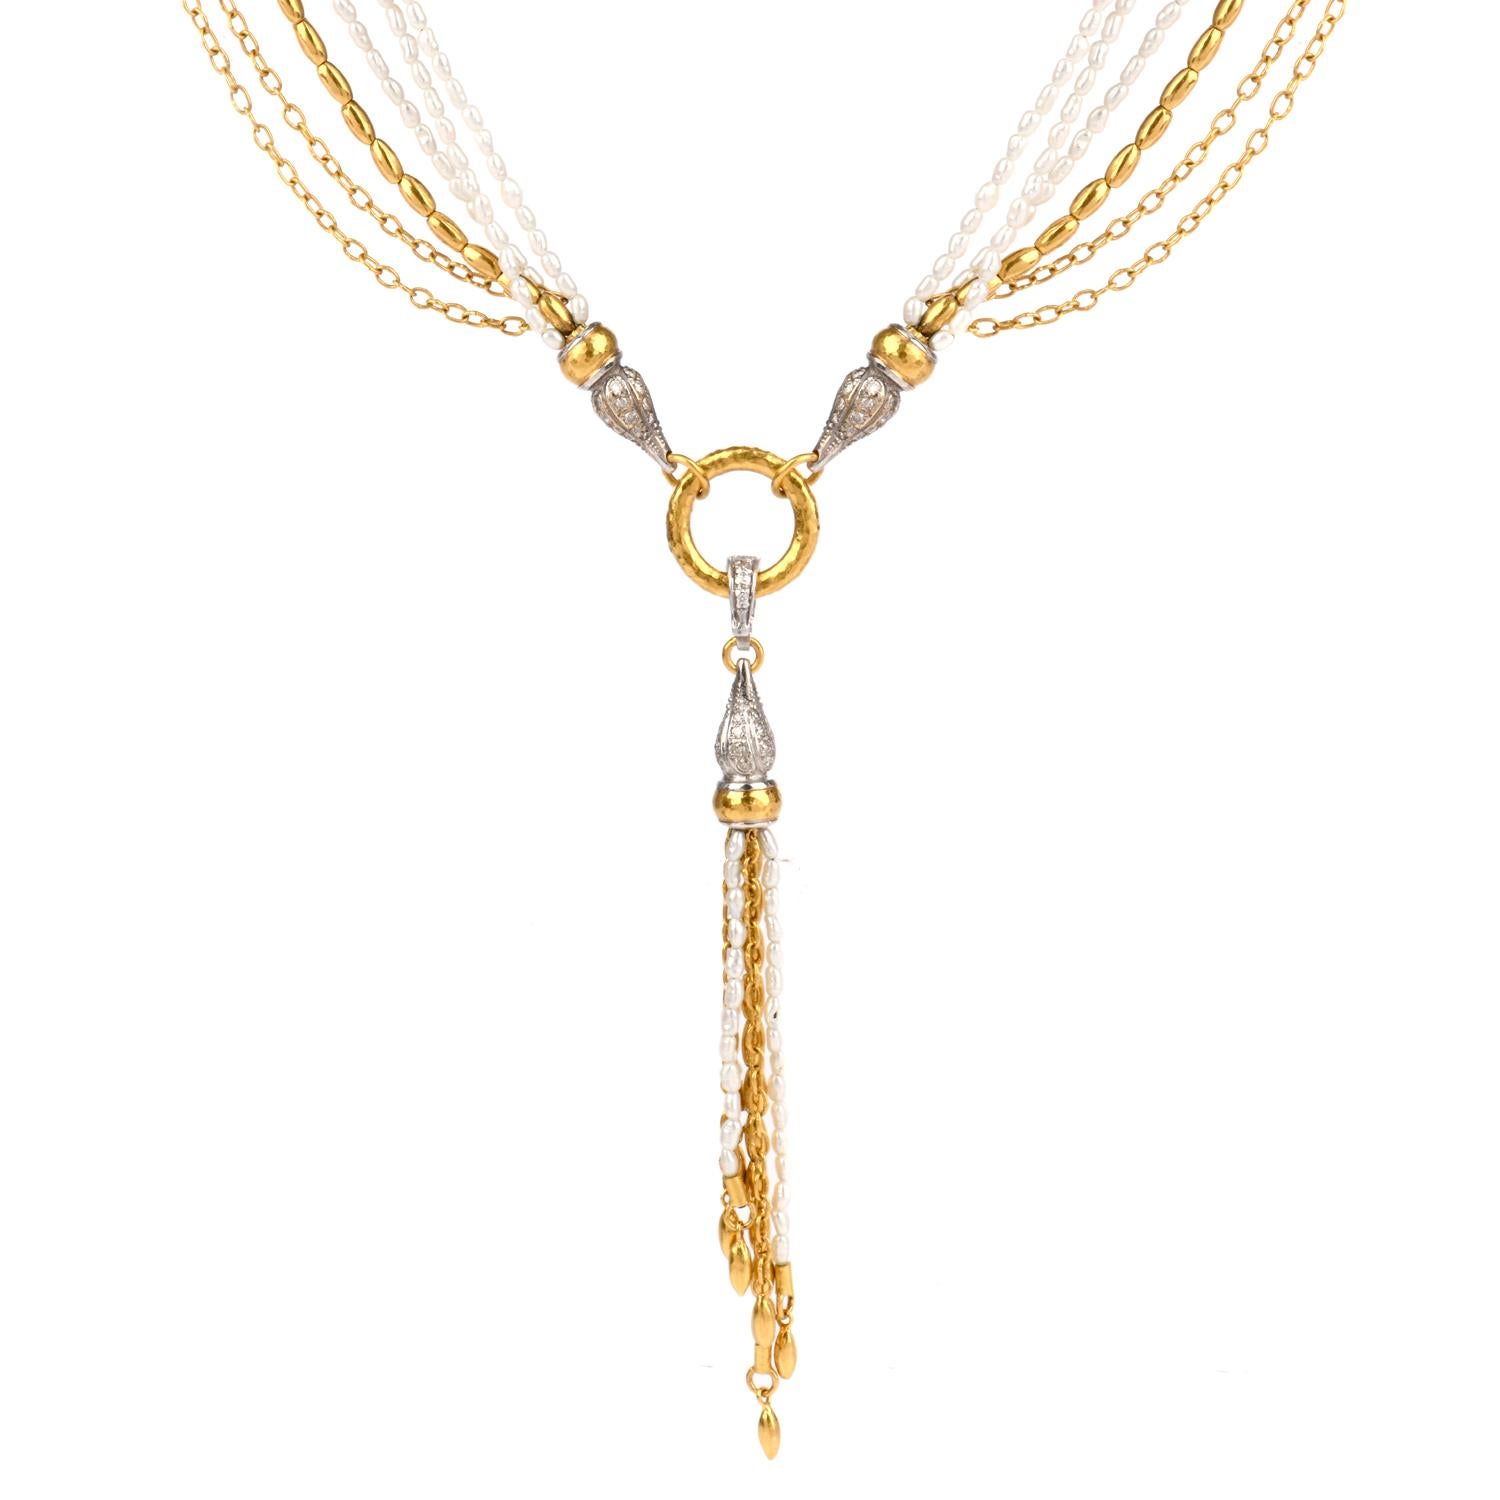 This stylish designer Gurhan multi strand tassel necklace is crafted in 18-karat yellow and white gold, weighing 57.6 grams and measuring 24